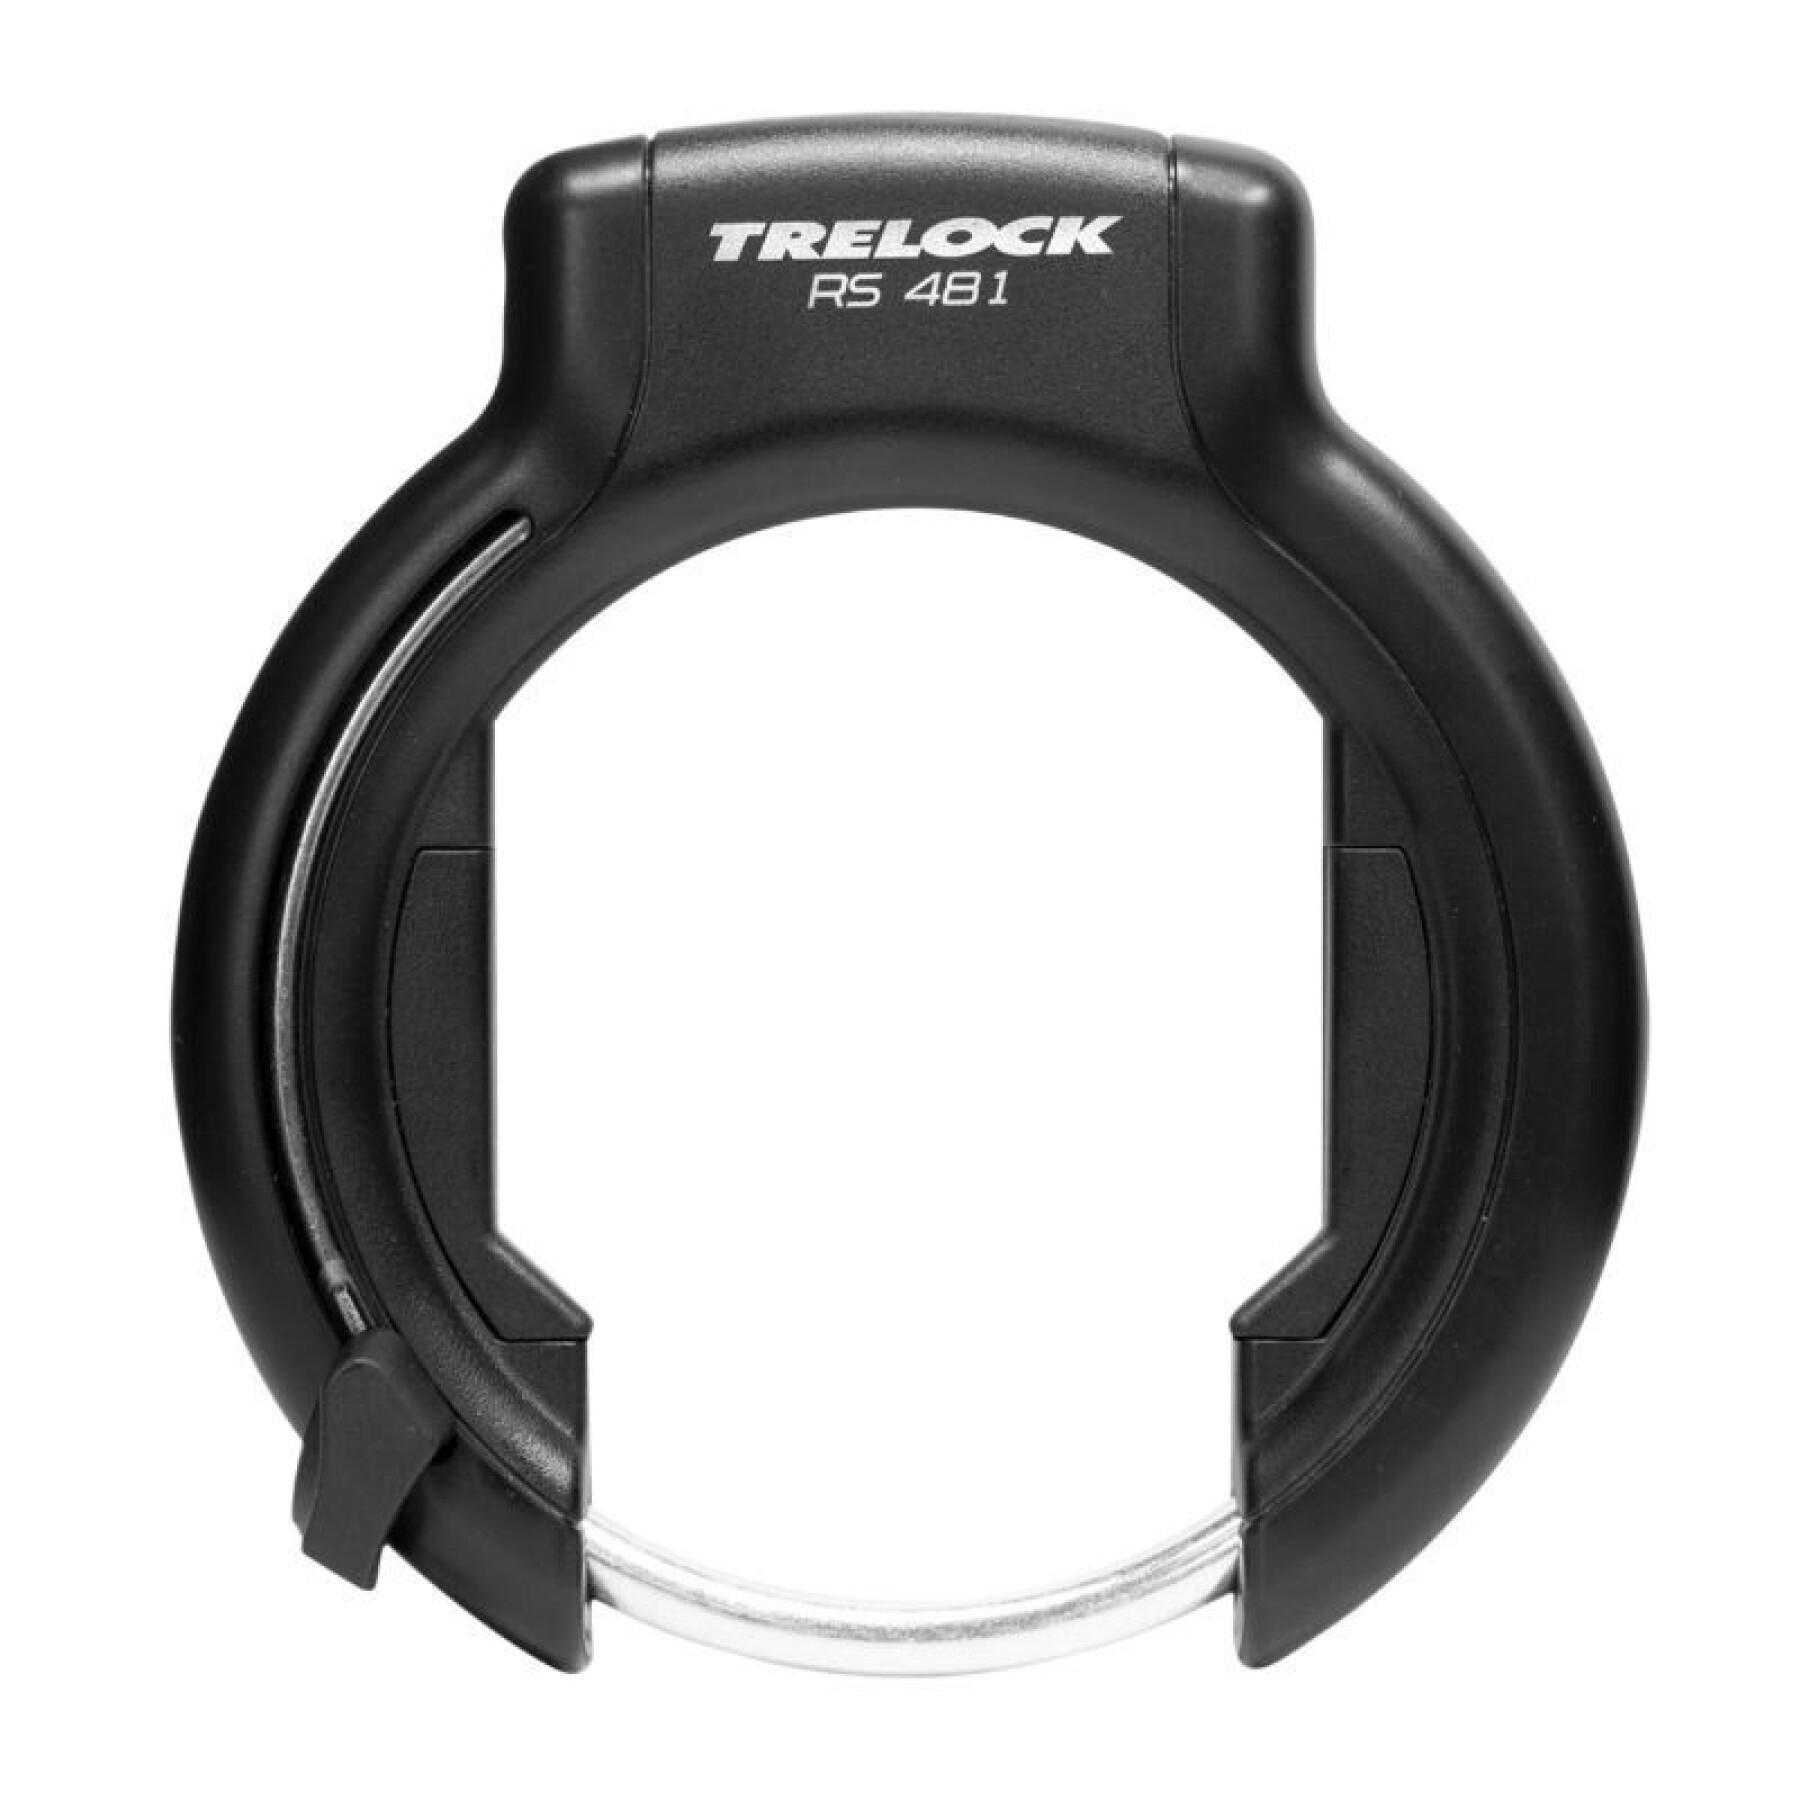 Horseshoe anti-theft device with frame mounting Trelock Rs481